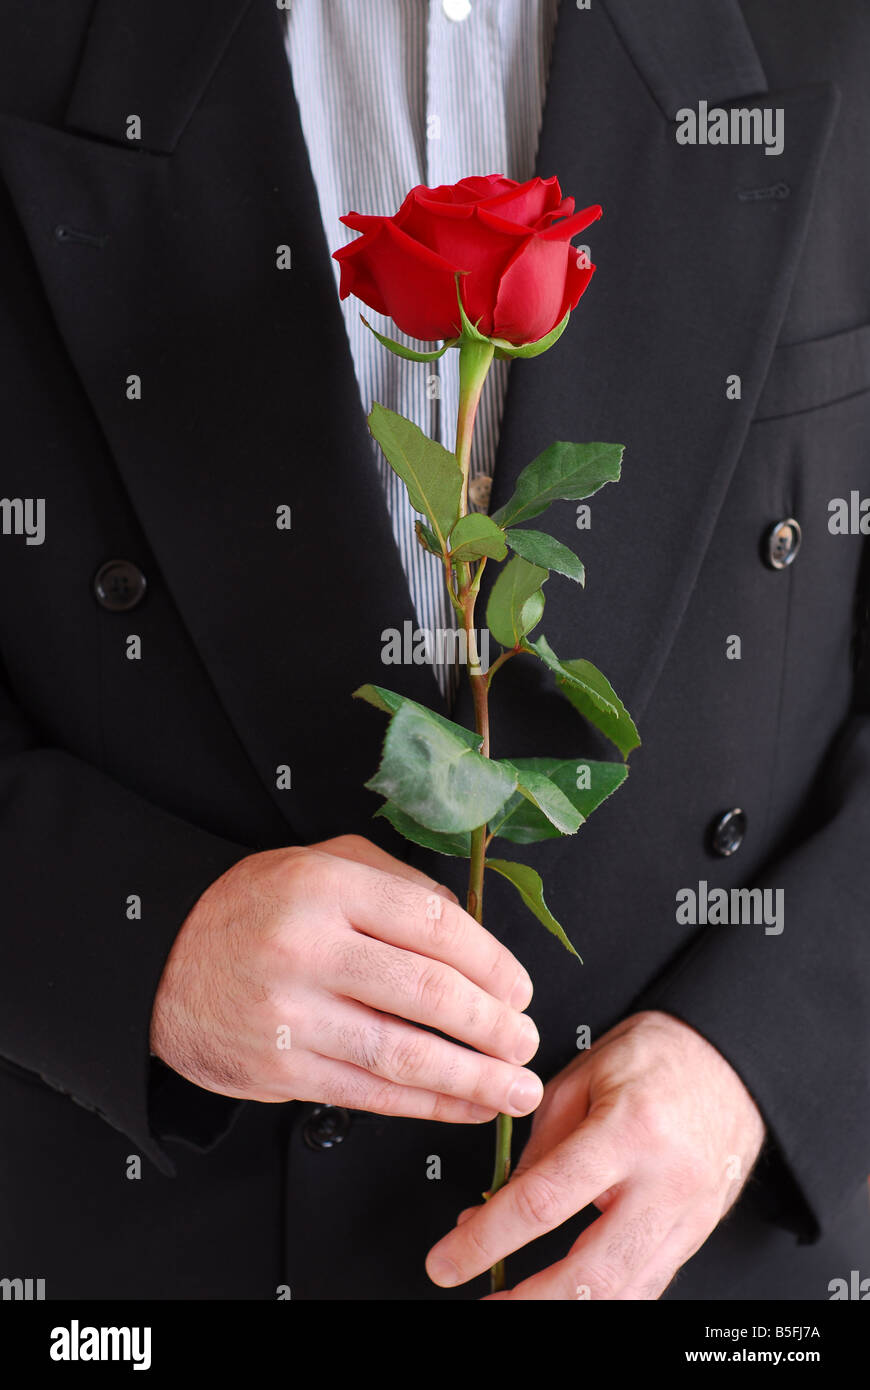 Man in black suit holding a red rose Stock Photo - Alamy